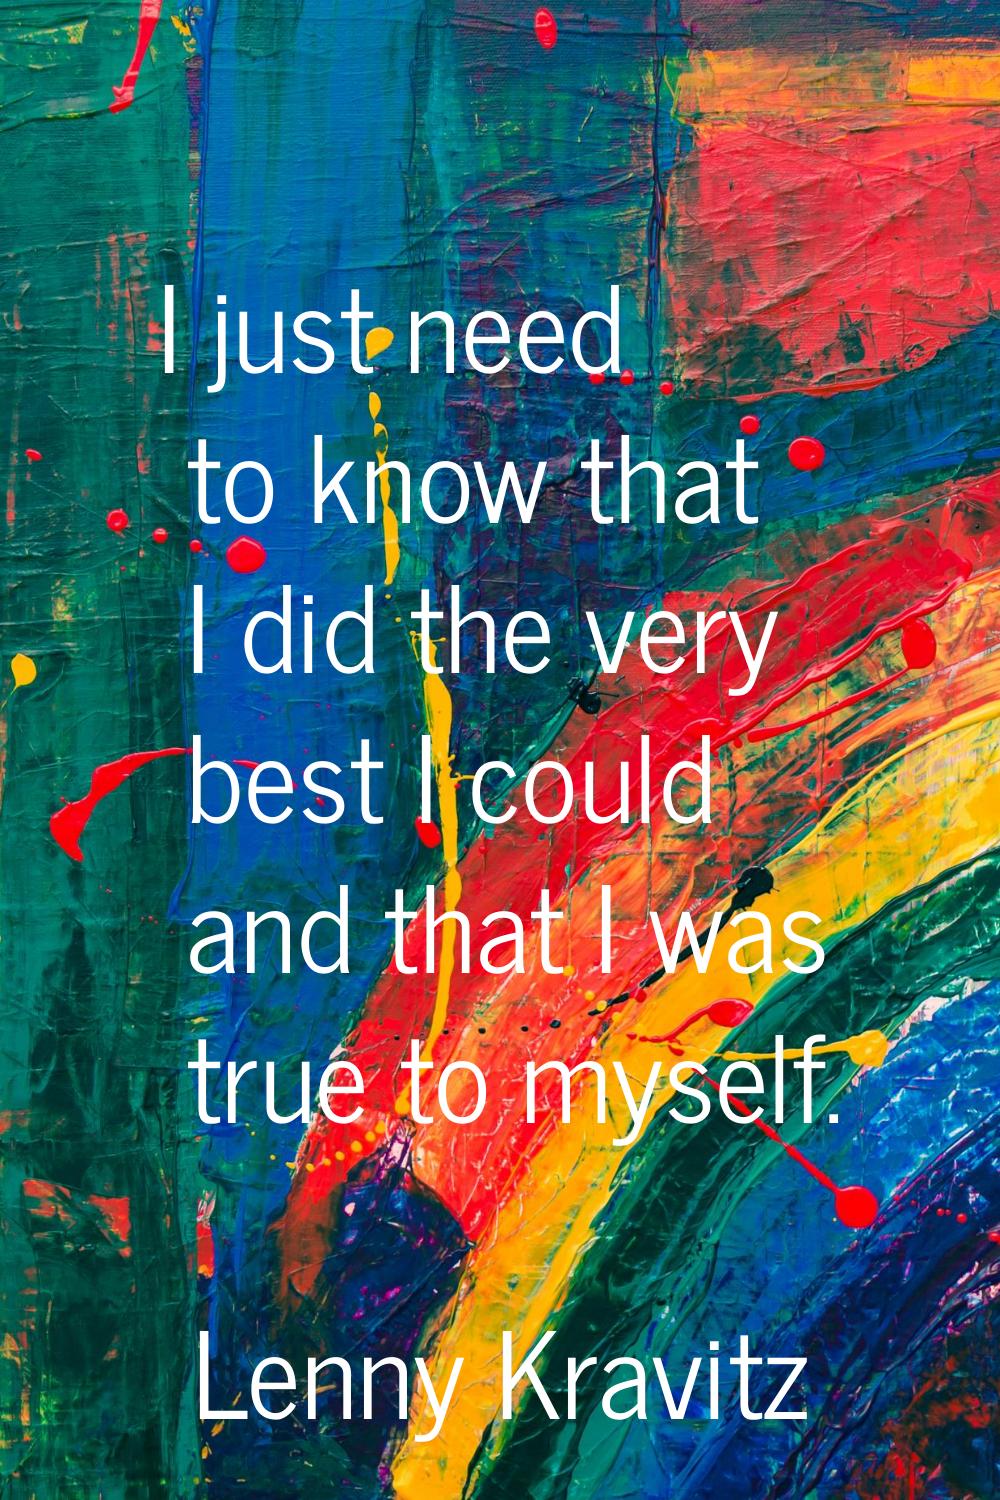 I just need to know that I did the very best I could and that I was true to myself.